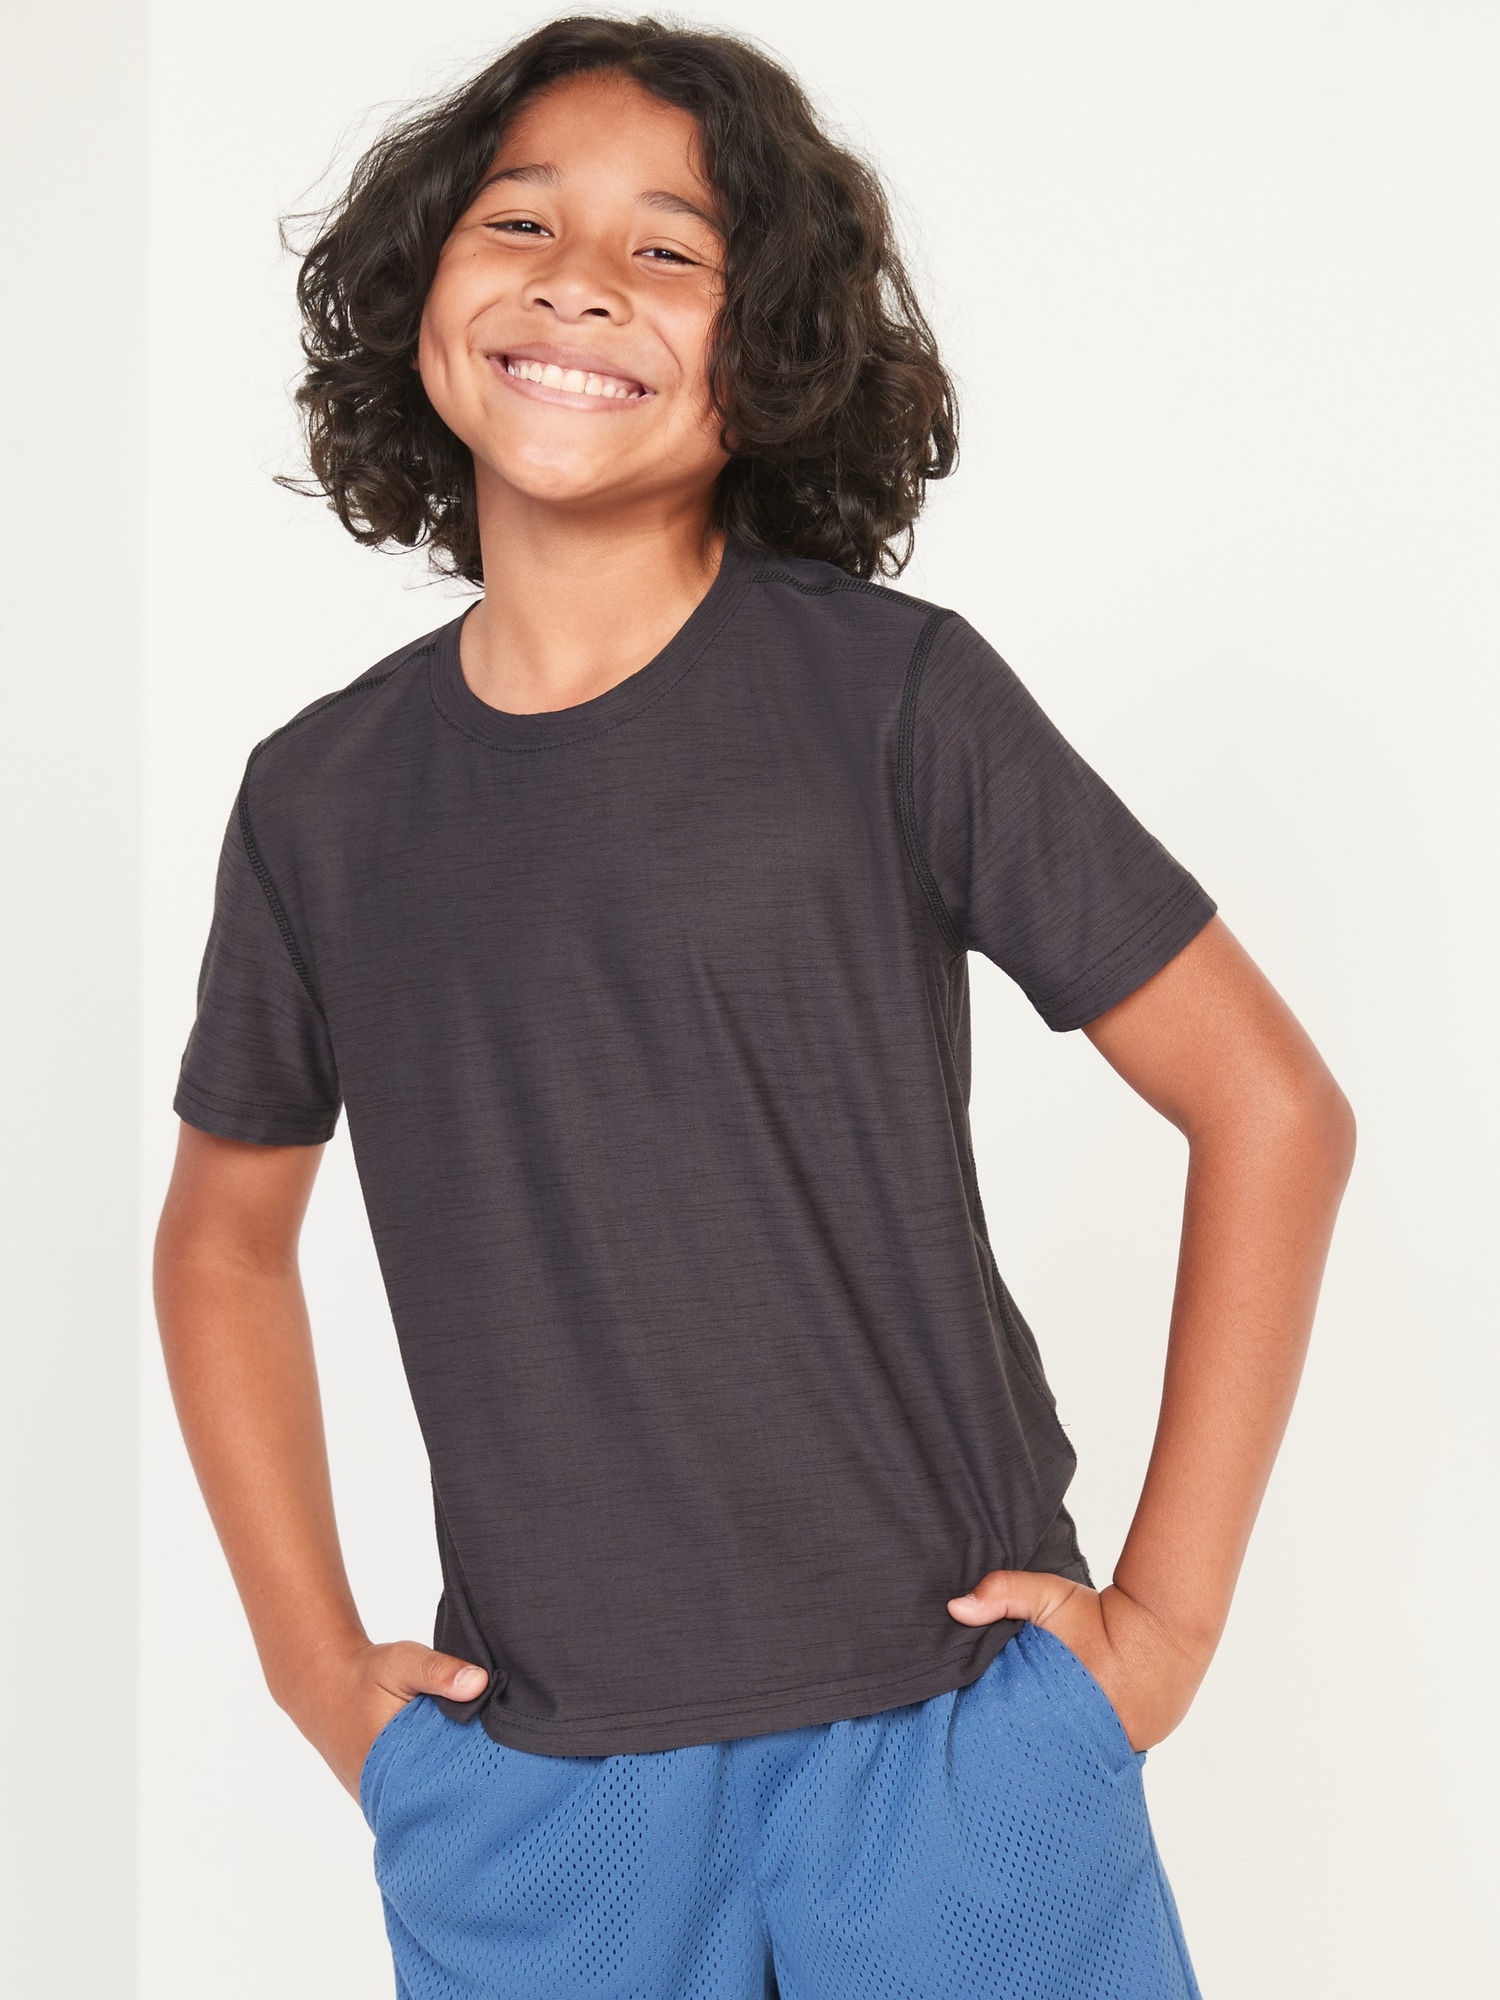 Old Navy Breathe ON Performance T-Shirt for Boys gray. 1